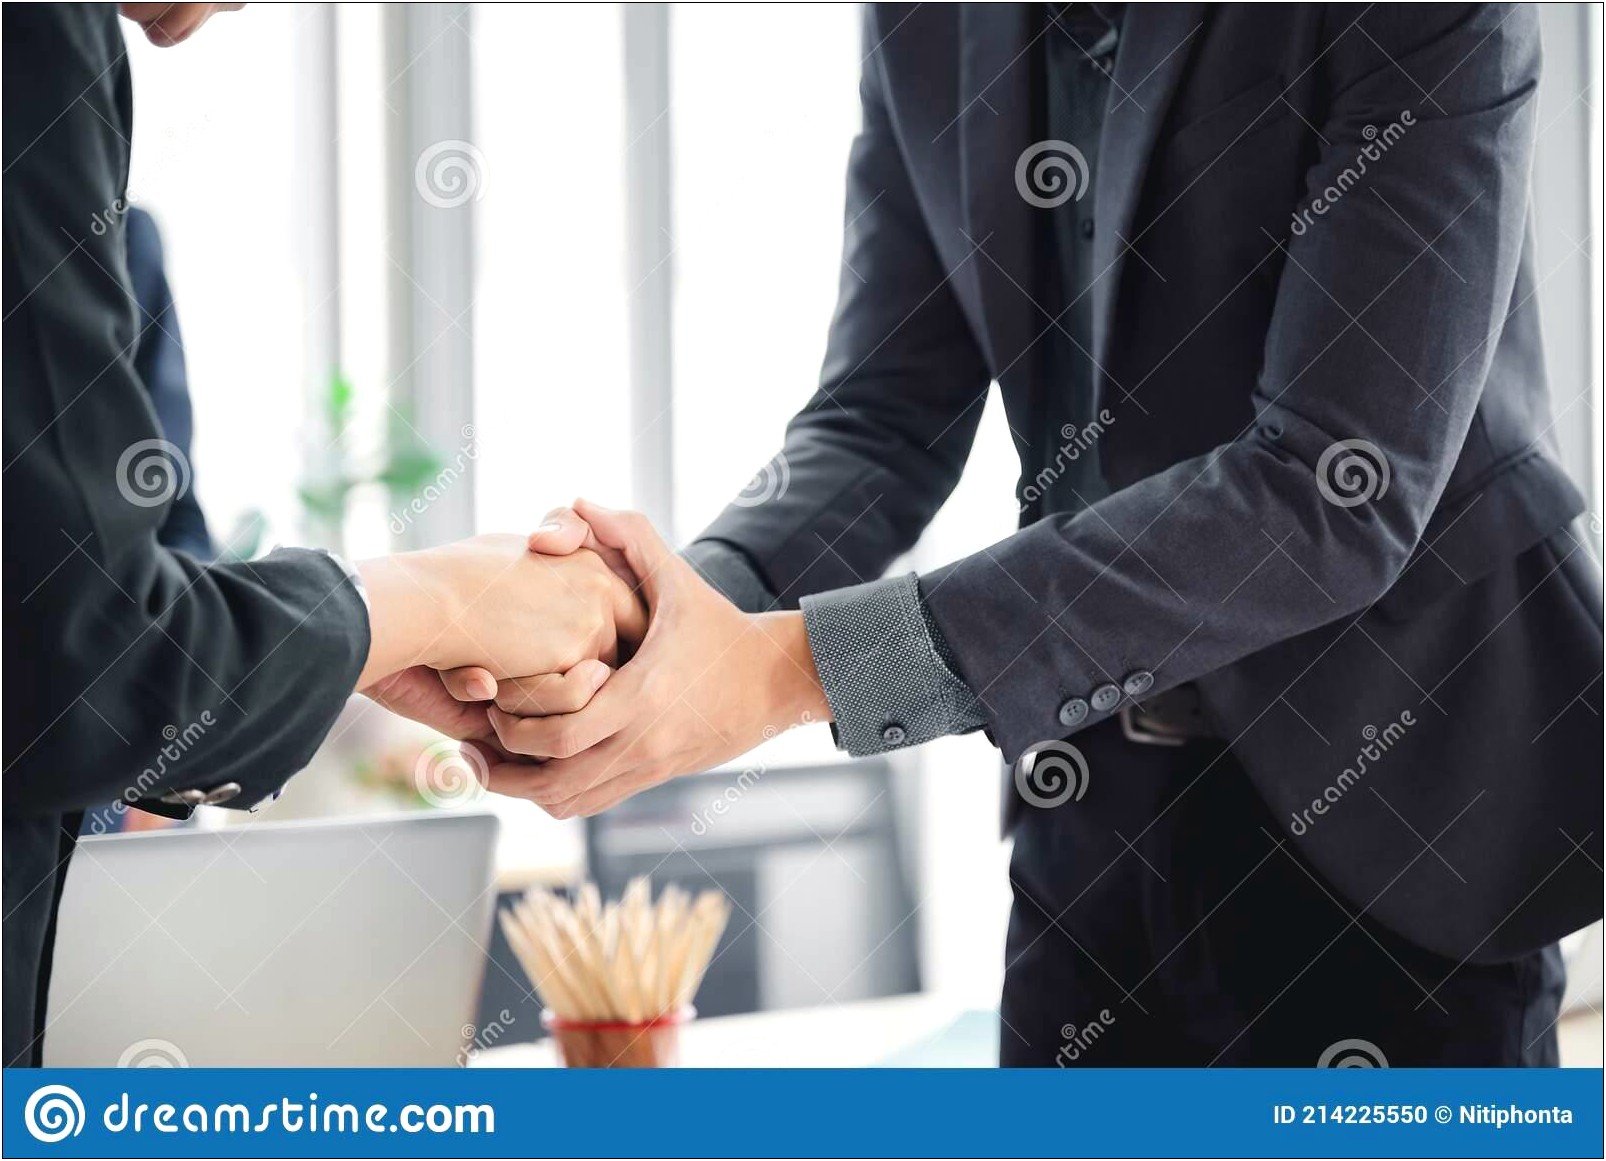 Husband And Wife Business Partnership Agreement Template Free